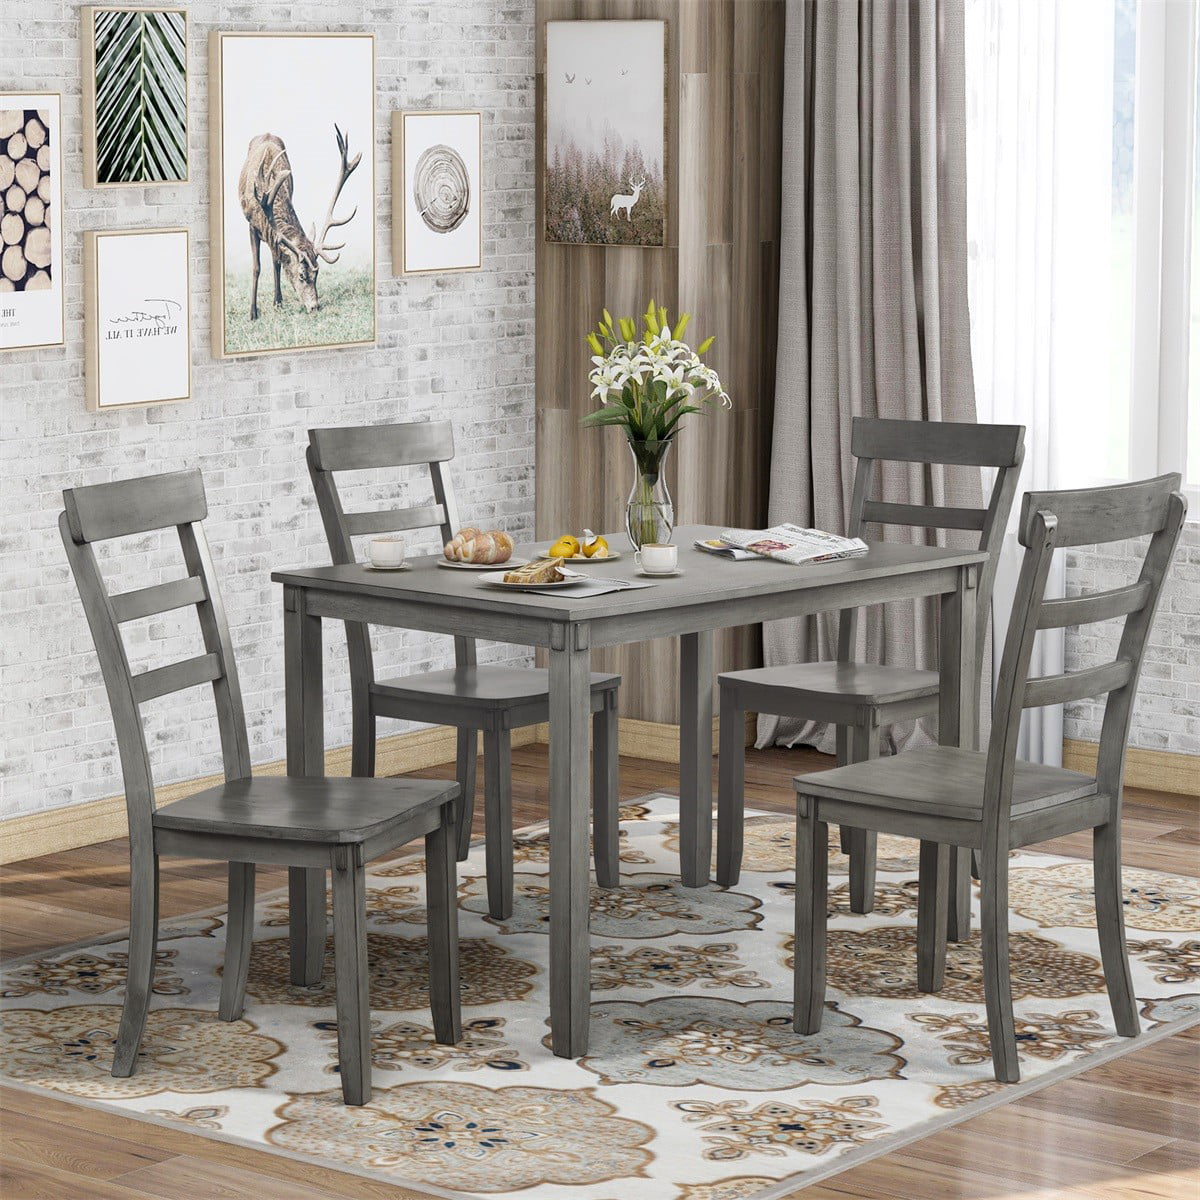 Sentern 5 Piece Dining Table Set Wood, 4 Piece Dining Room Set With Bench